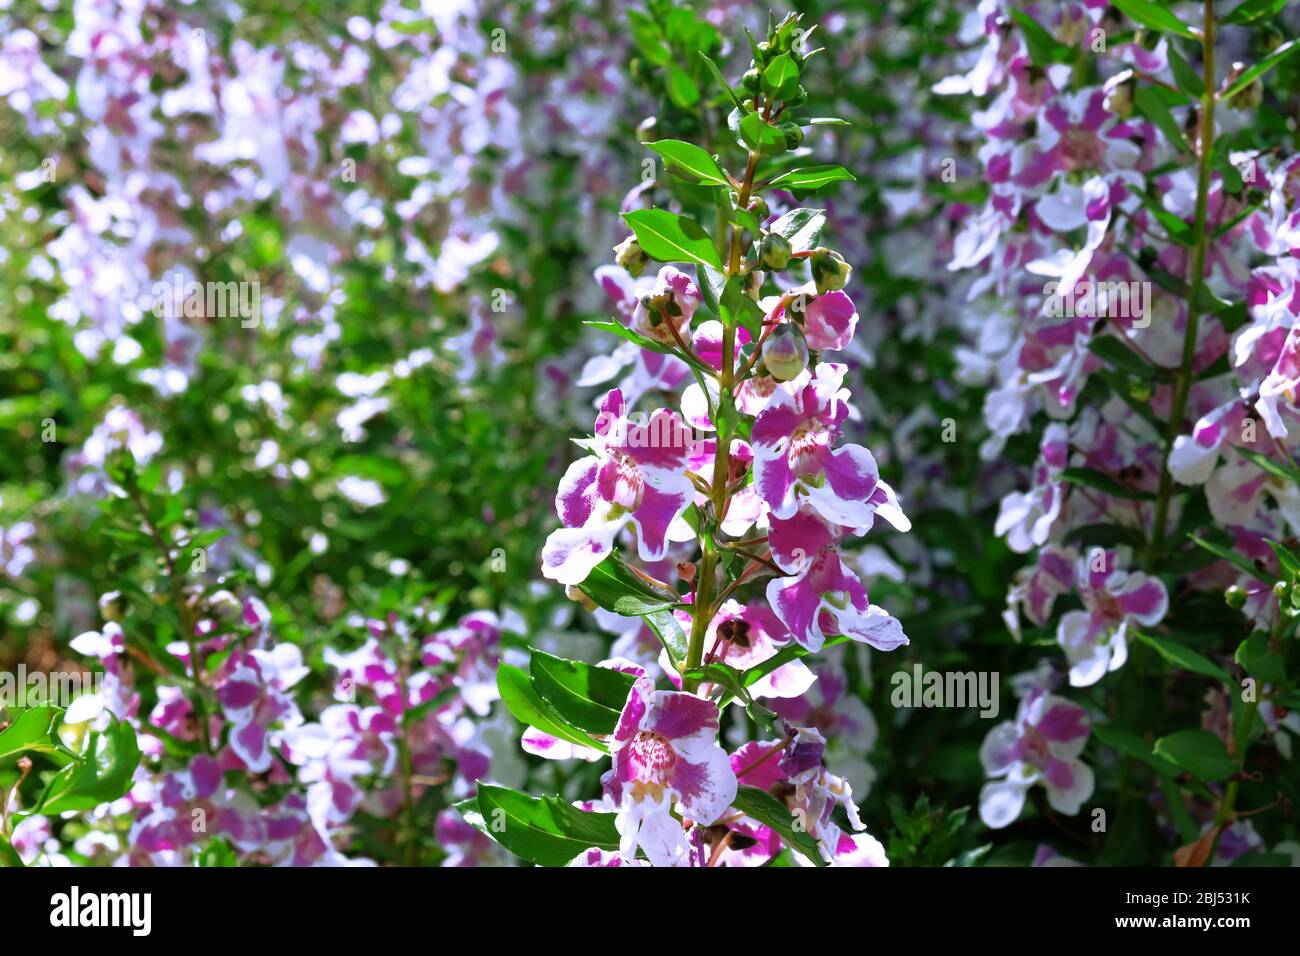 Beautiful field of Angelonia goyazensis flower Family Scrophulariaceae Stock Photo